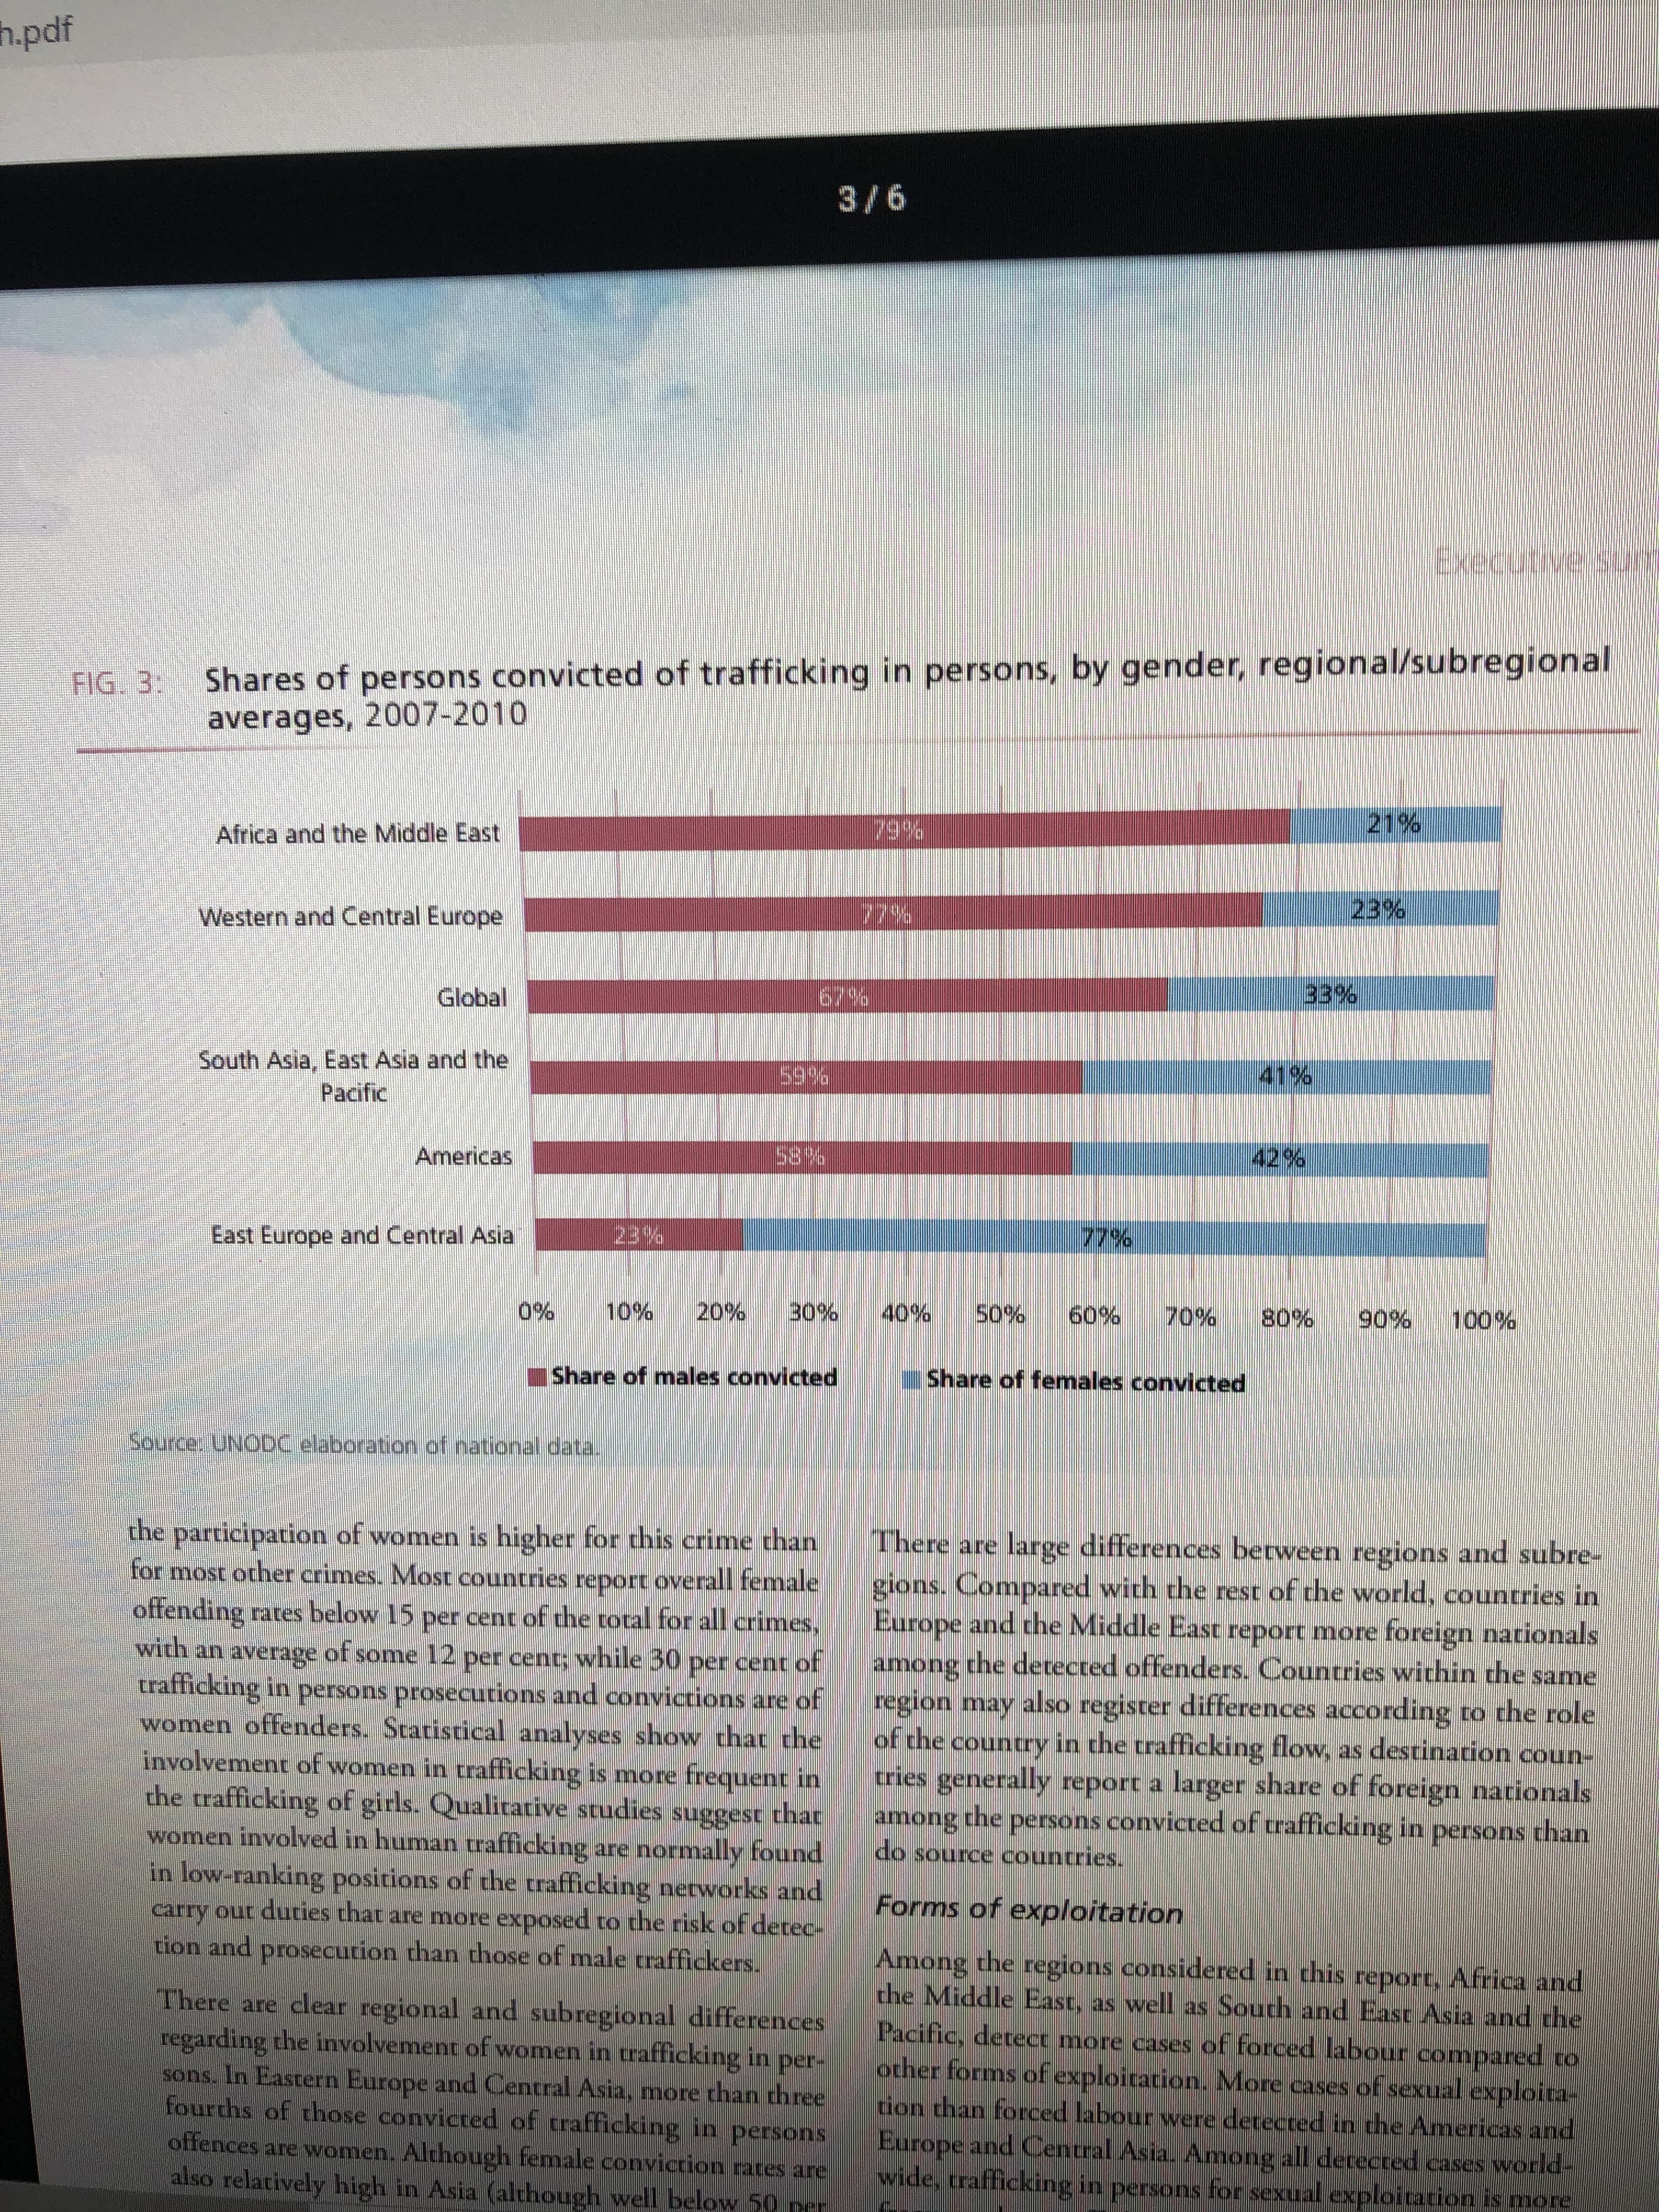 h.pdf
3/6
Executive surr
Shares of persons convicted of trafficking in persons, by gender, regional/subregional
averages, 2007-2010
FIG. 3:
Africa and the Middle East
79%
21%
Western and Central Europe
77%
23%
Global
67%
33%
South Asia, East Asia and the
59%
41%
Pacific
Americas
58%
42%
East Europe and Central Asia
23%
77%
10%
20%
30%
40%
50%
60%
70%
80%
90%
100%
IShare of males convicted
Share of females convicted
Source: UNODC elaboration of national data.
the participation of women is higher for this crime than
for most other crimes. Most countries report overall female
offending rates below 15 per cent of the total for all crimes,
with an average of some 12 per cent; while 30 per cent of
trafficking in persons prosecutions and convictions are of
women offenders. Statistical analyses show that the
involvement of women in trafficking is more frequent in
the trafficking of girls. Qualicative studies suggest that
women involved in human trafficking are normally found
in low-ranking positions of the trafficking networks and
carry out duties that are more exposed to the risk of detec-
tion and prosecution than those of male traffickers.
There are large differences berween regions and subre-
gions. Compared with the rest of the world, countries in
Europe and the Middle East report more foreign nationals
among the detected offenders. Countries within the same
region may also register differences according to the role
of the country in the trafficking flow, as destination coun-
cries generally report a larger share of foreign nationals
among the persons convicted of trafficking in persons than
Suoure
do source countries.
Forms of exploitation
There are clear regional and subregional differences
regarding the involvement of women in trafficking in per-
sons. In Eastern Europe and Central Asia, more than three
fourchs of those convicted of crafficking in persons
offences are women. Although female conviction rates are
also relatively high in Asia (although well below 50 per
Among the regions considered in this report, Africa and
the Middle East, as well as South and East Asia and the
Pacific, detect more cases of forced labour compared to
other forms of exploitation. More cases of sexual exploita-
ion than forced labour were detecred in the Americas and
Europe and Central Asia. Among all decected cases world-
wide, trafficking in persons for sexual exploitation is more
